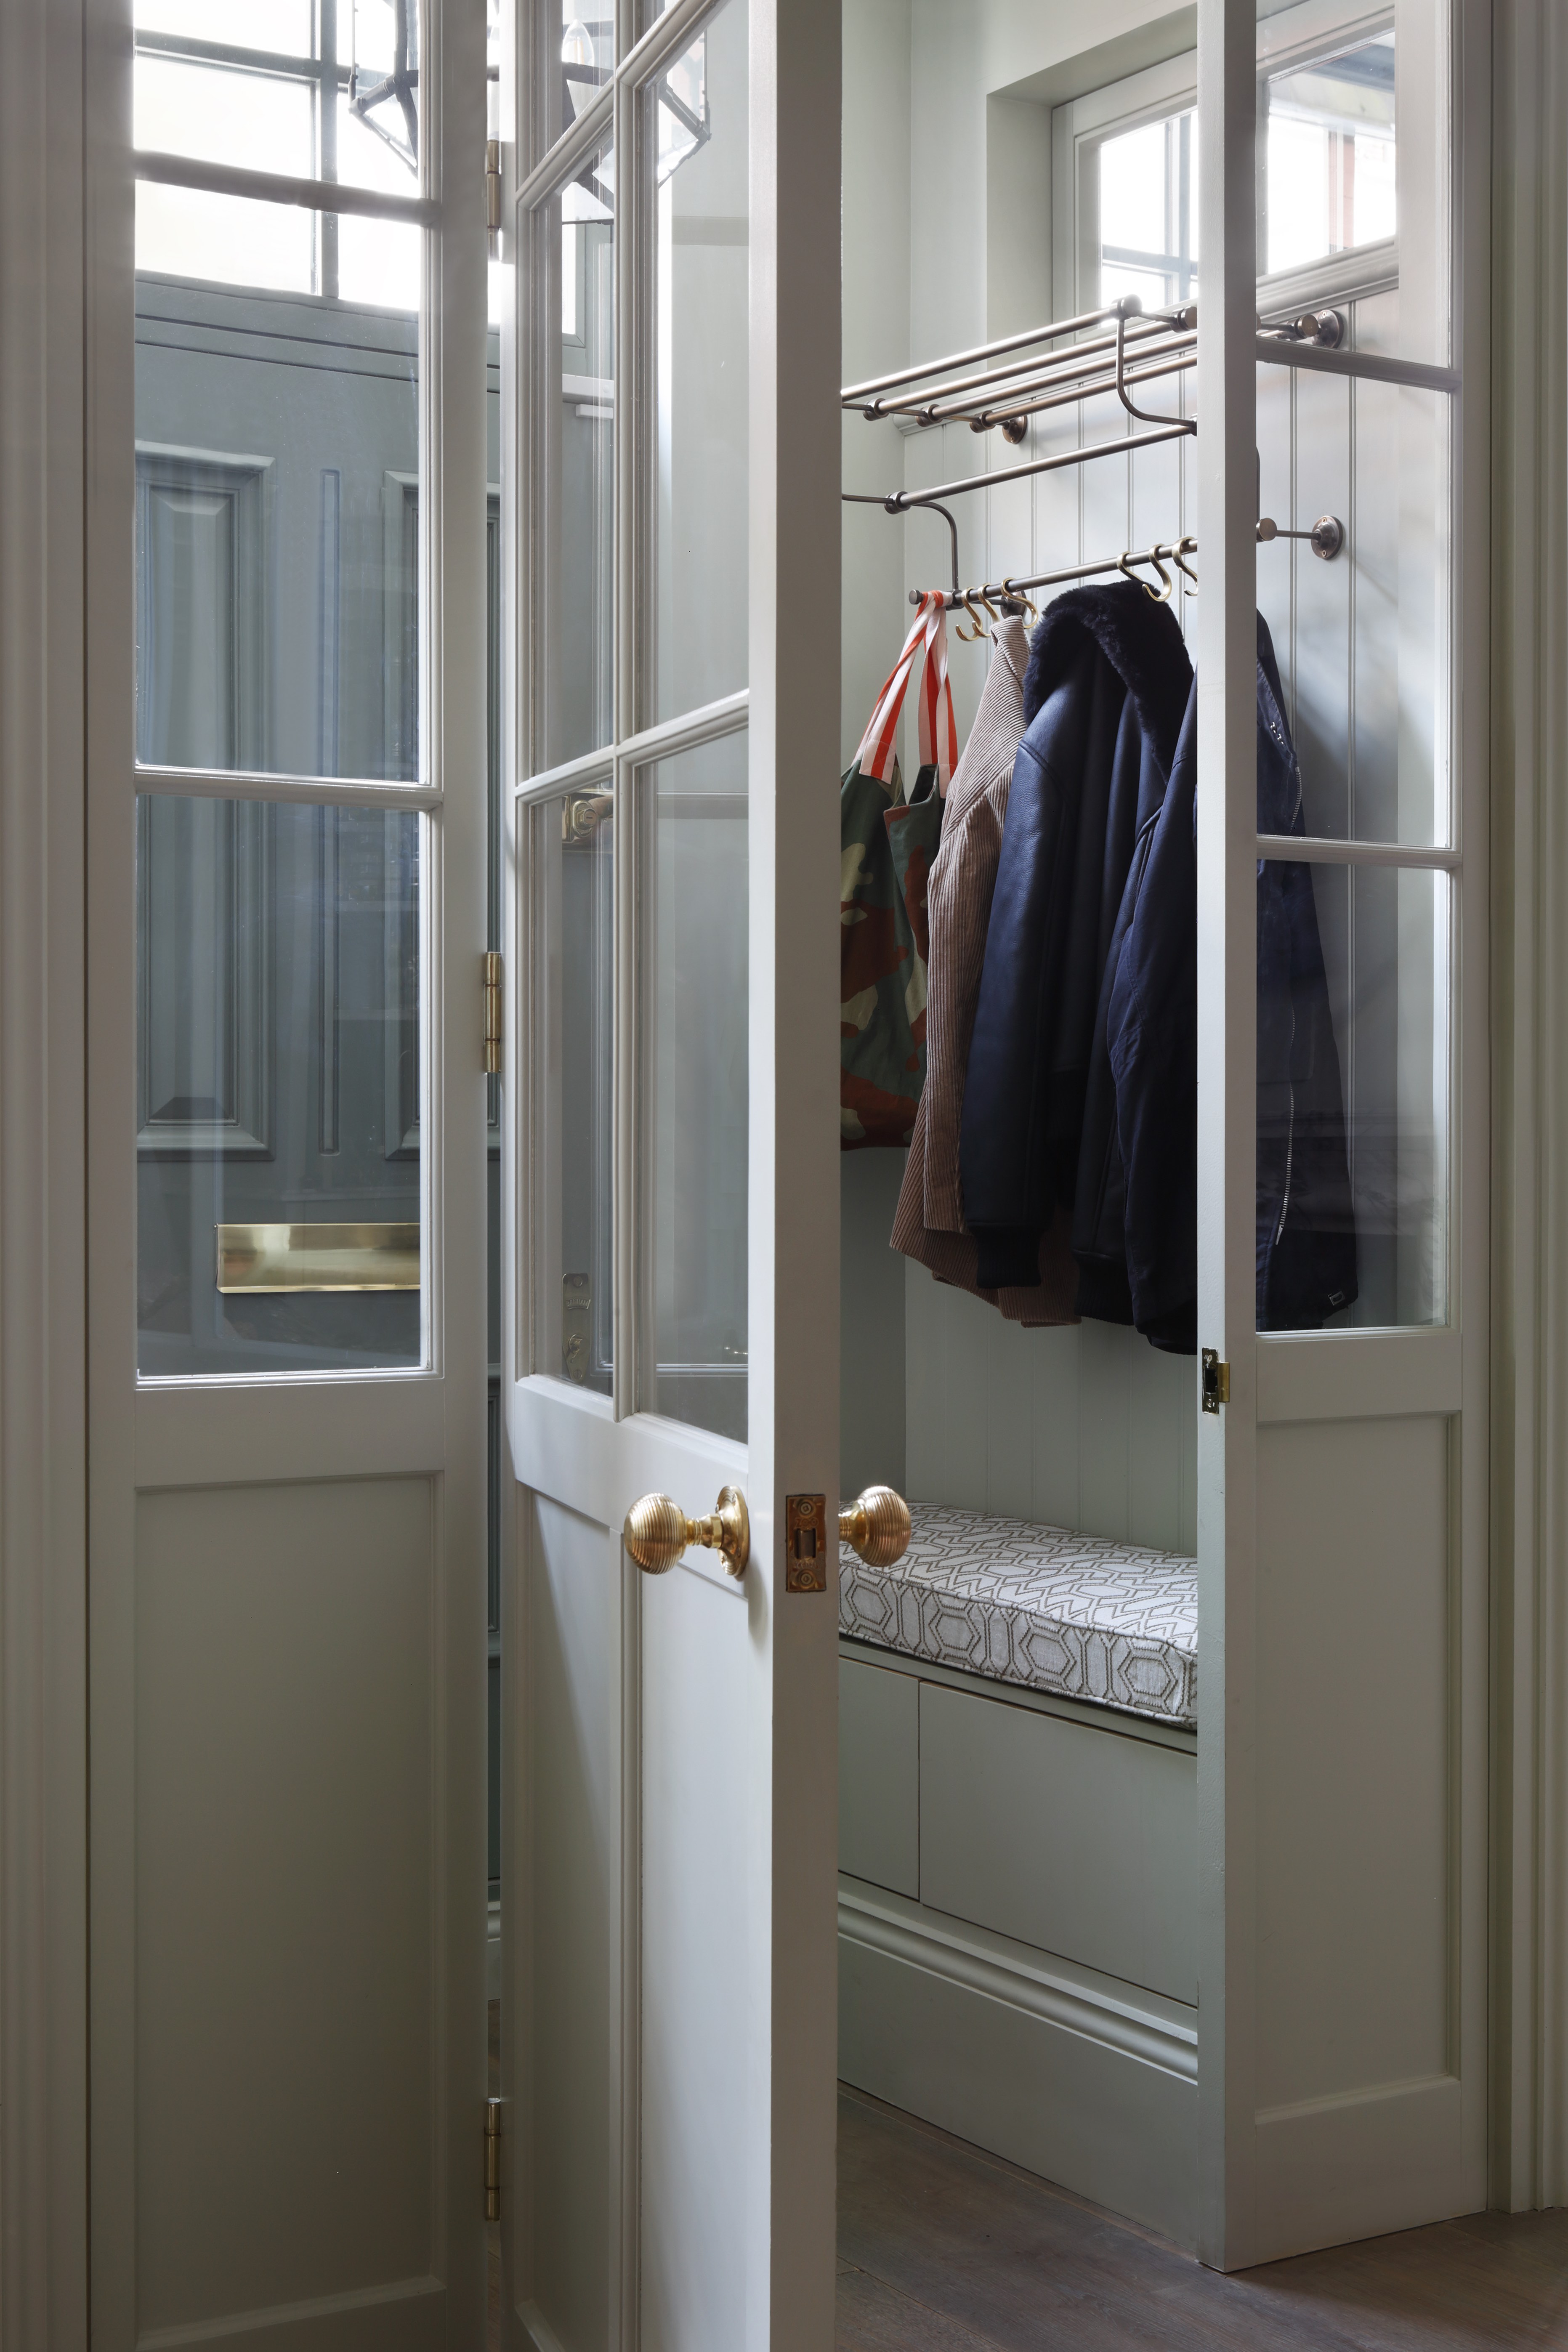 Small entryway storage ideas by Alexander James